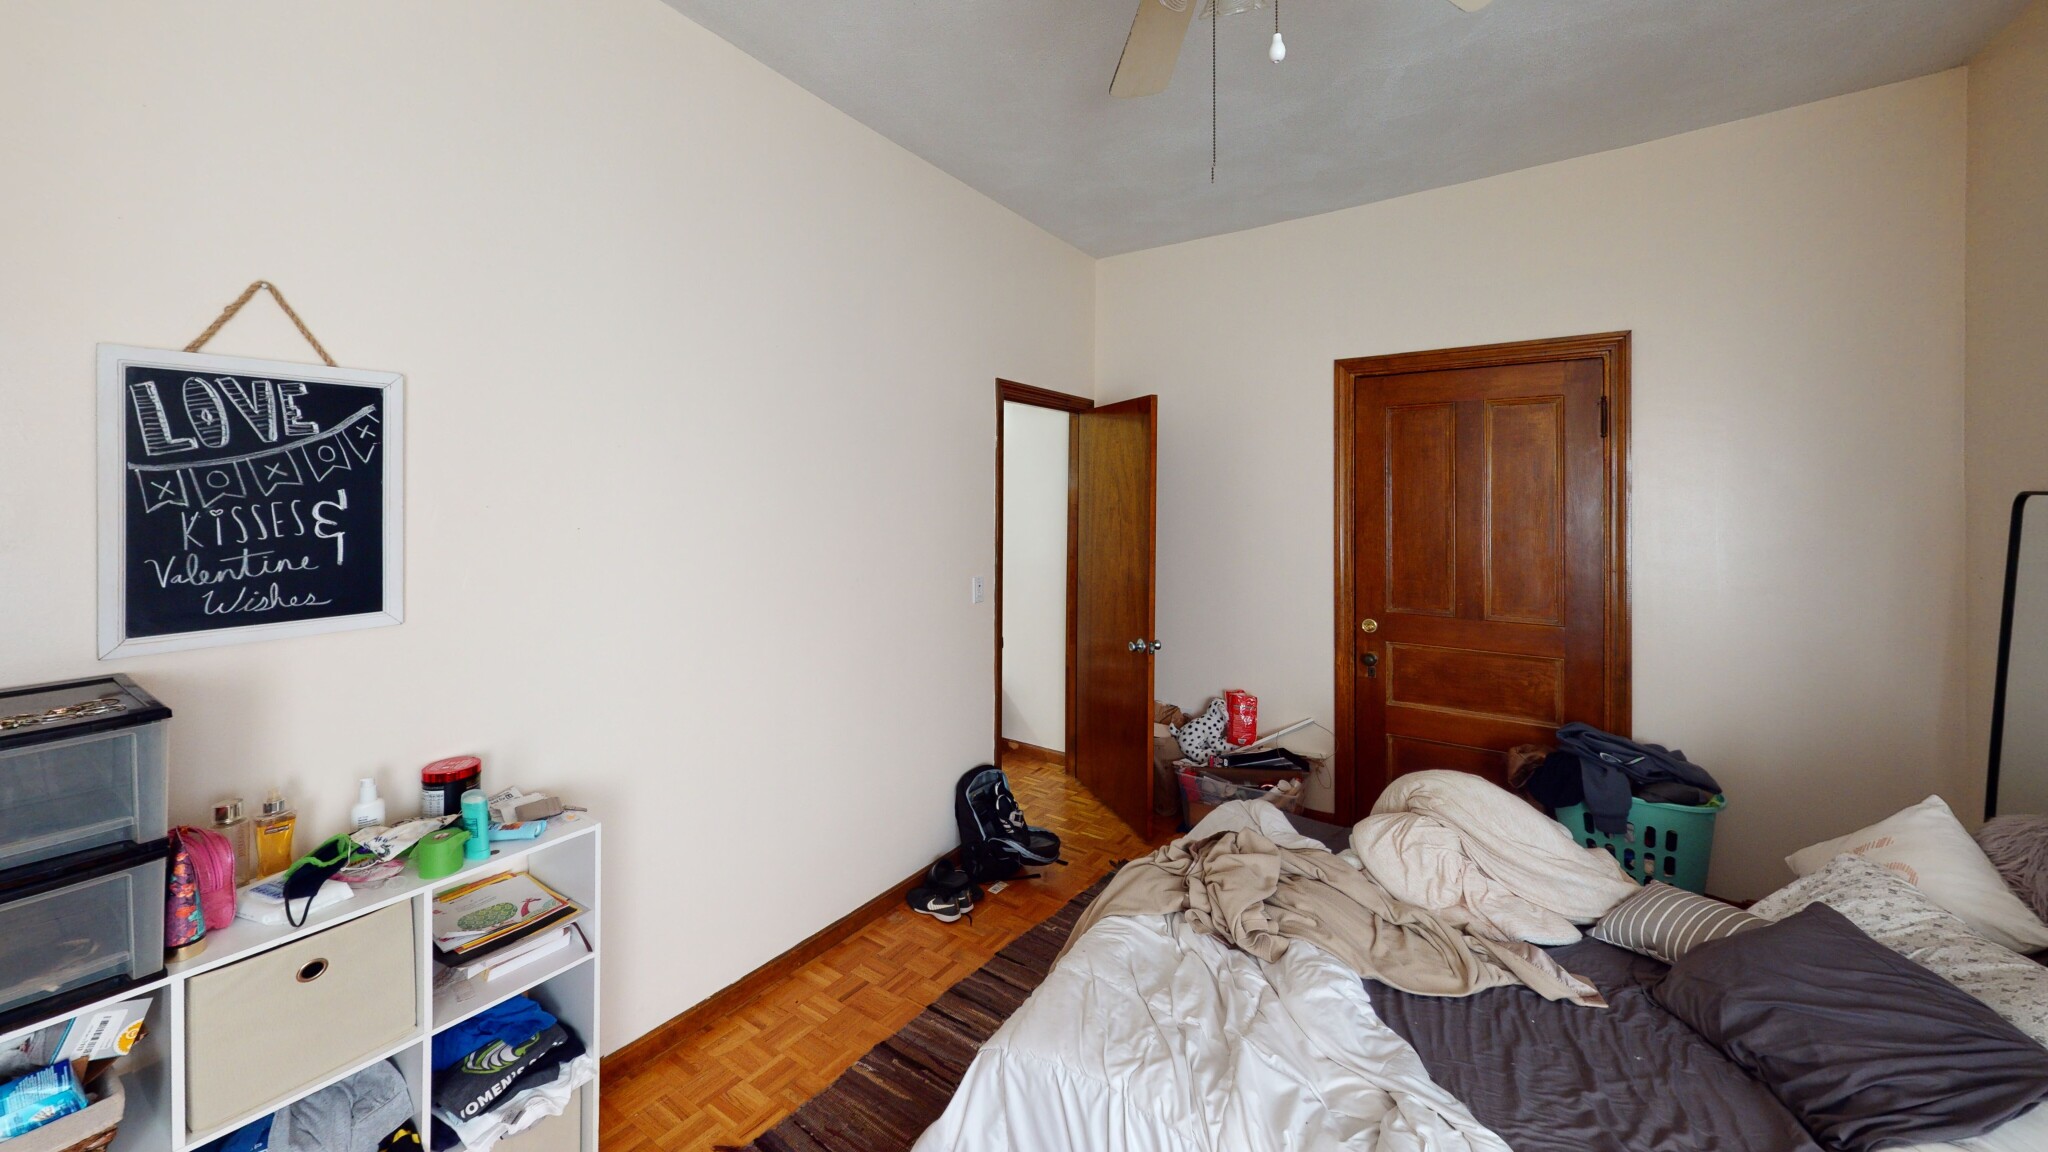 Photos of apartment on School St.,Somerville MA 02145